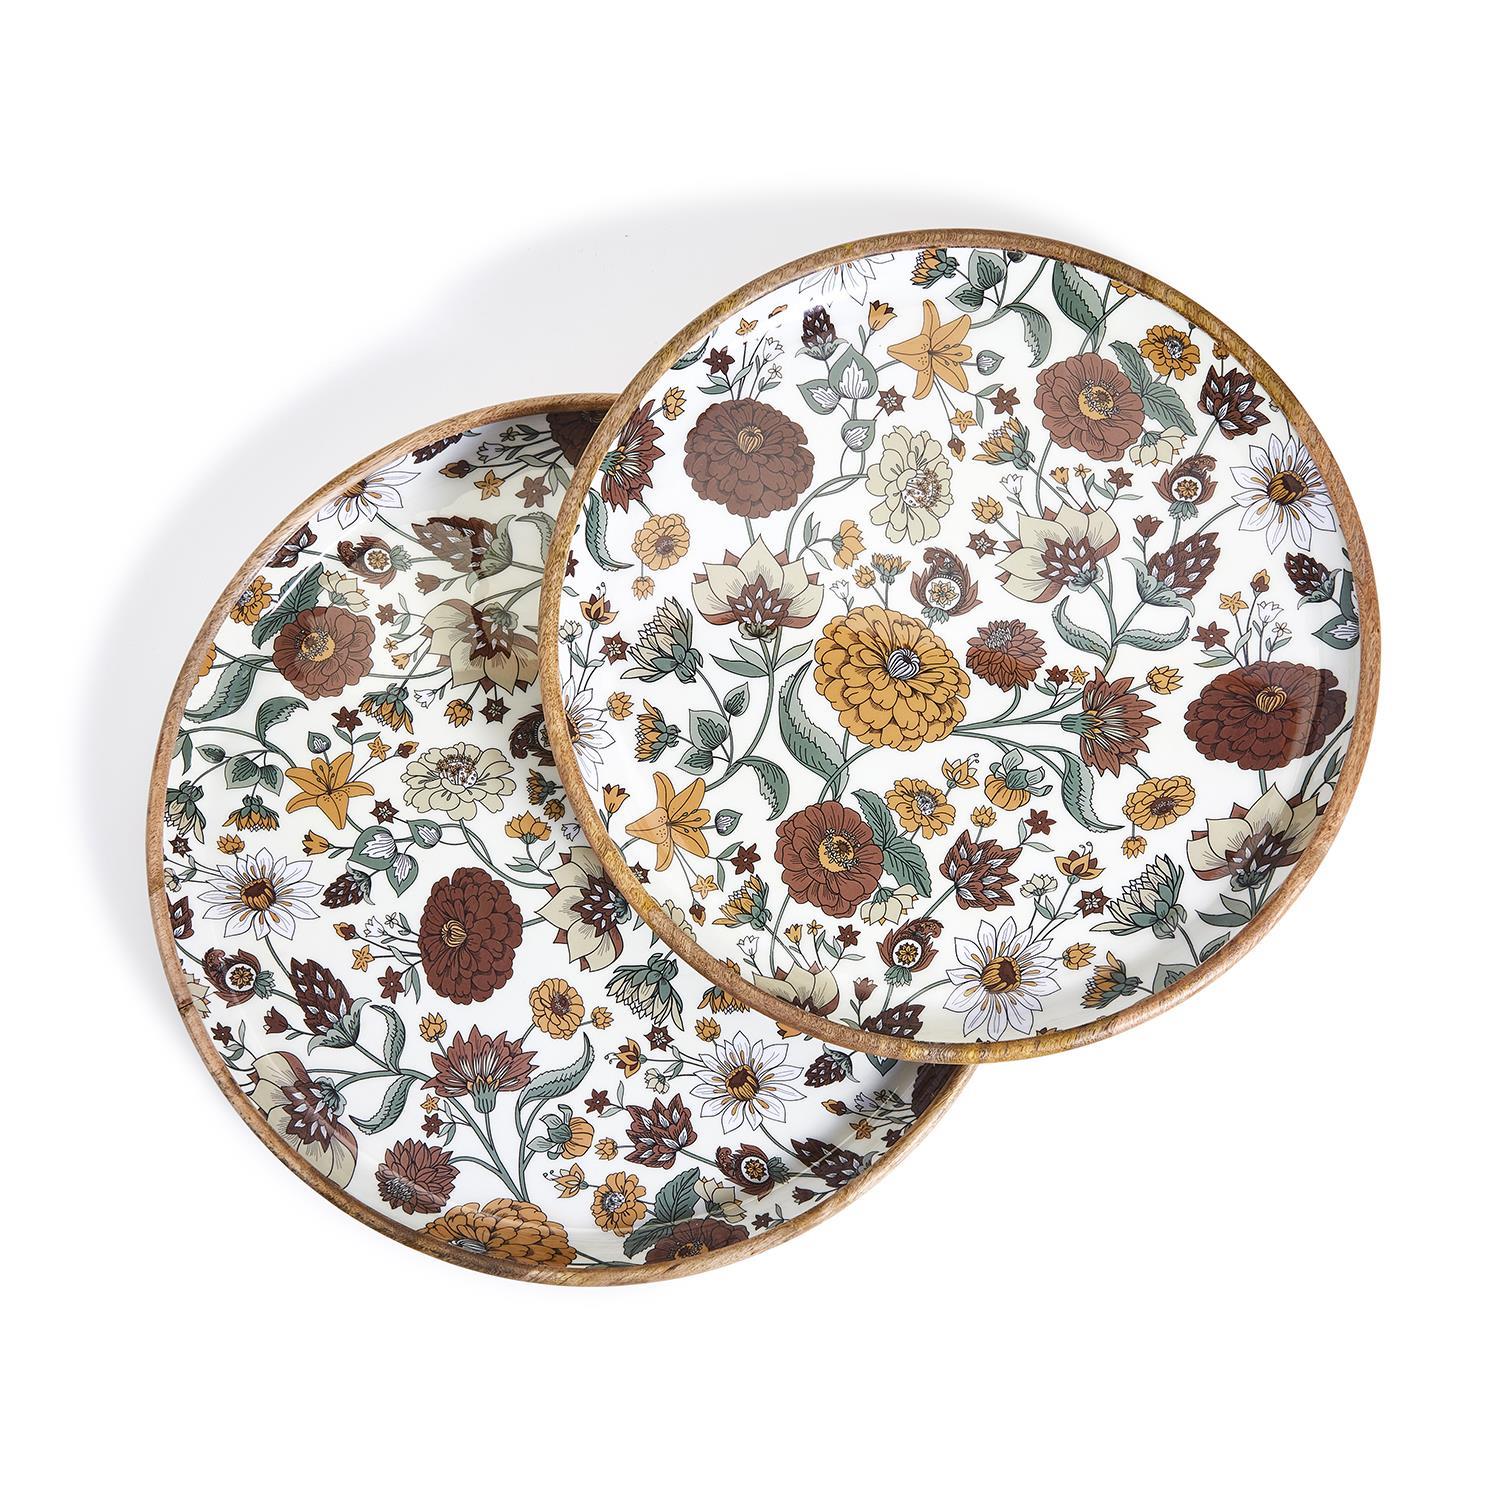 Two's Company Naturally Floral Set of 2 Hand-Crafted Wood Round Trays